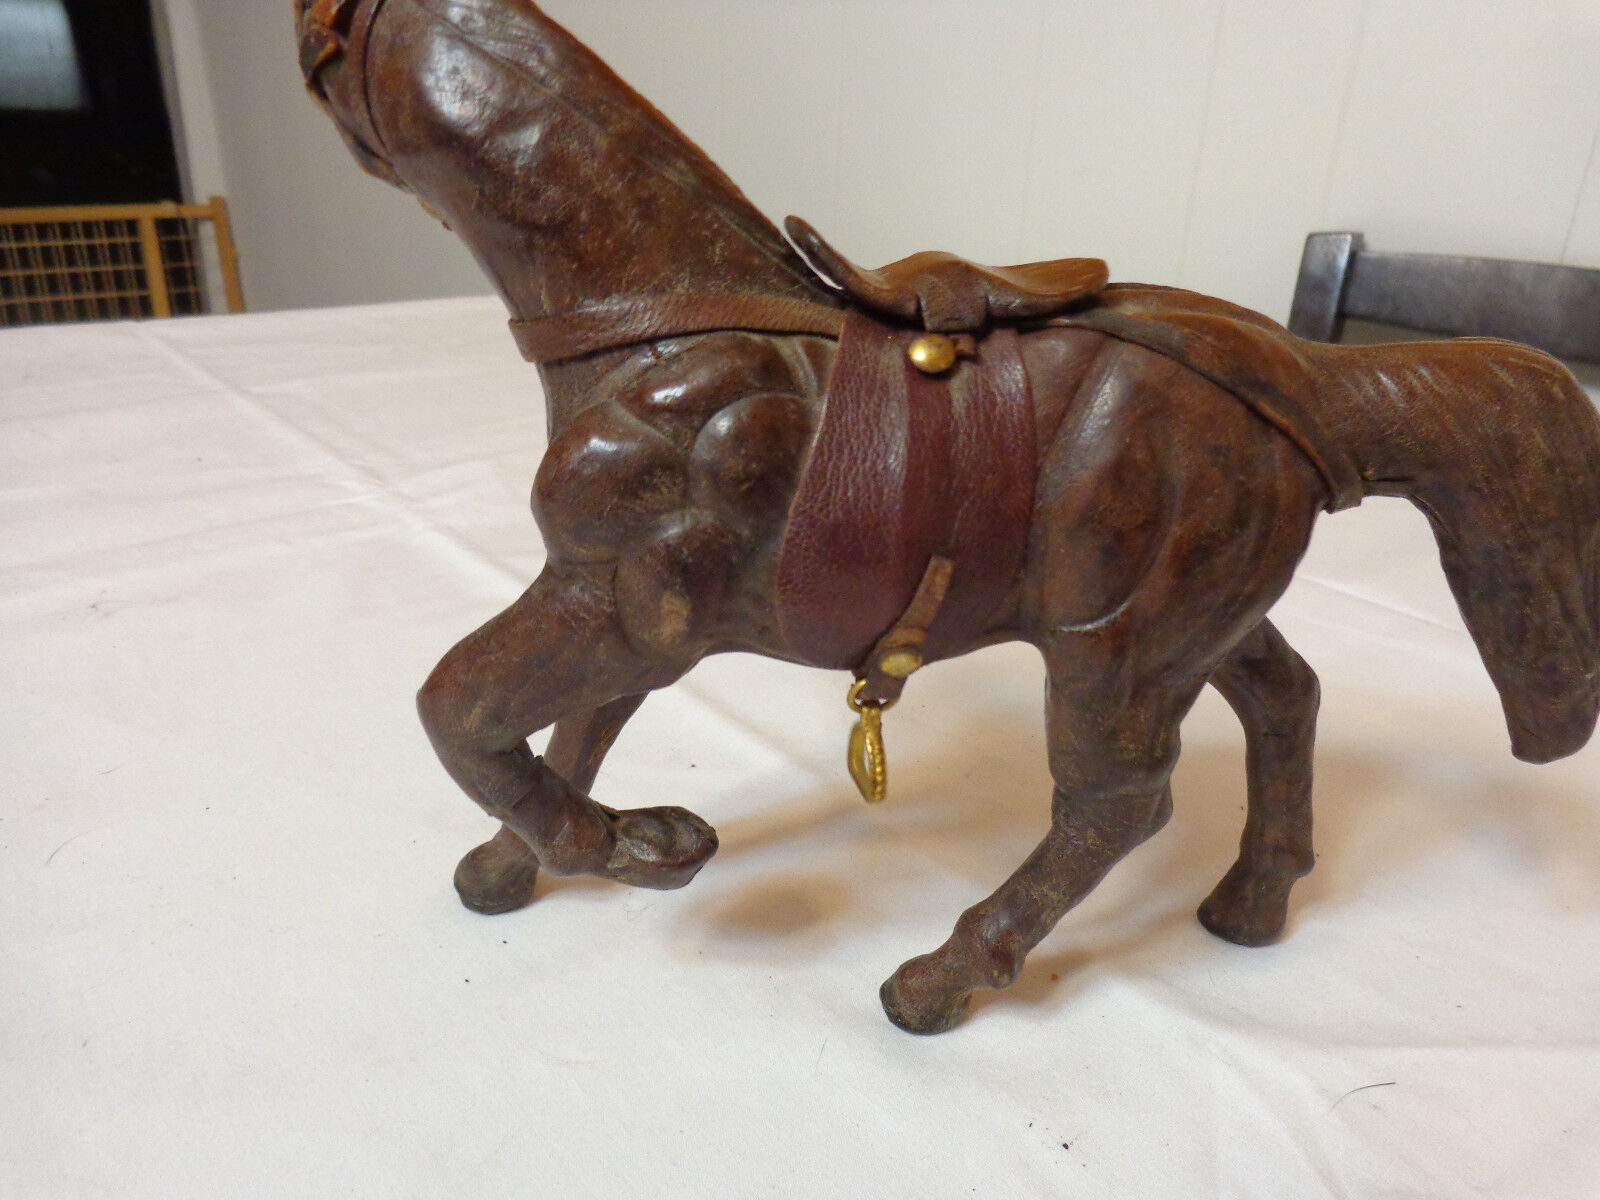 Vintage Leather Wrapped Standing Horse Figurine 7-8 Inches Tall Без бренда - фотография #4